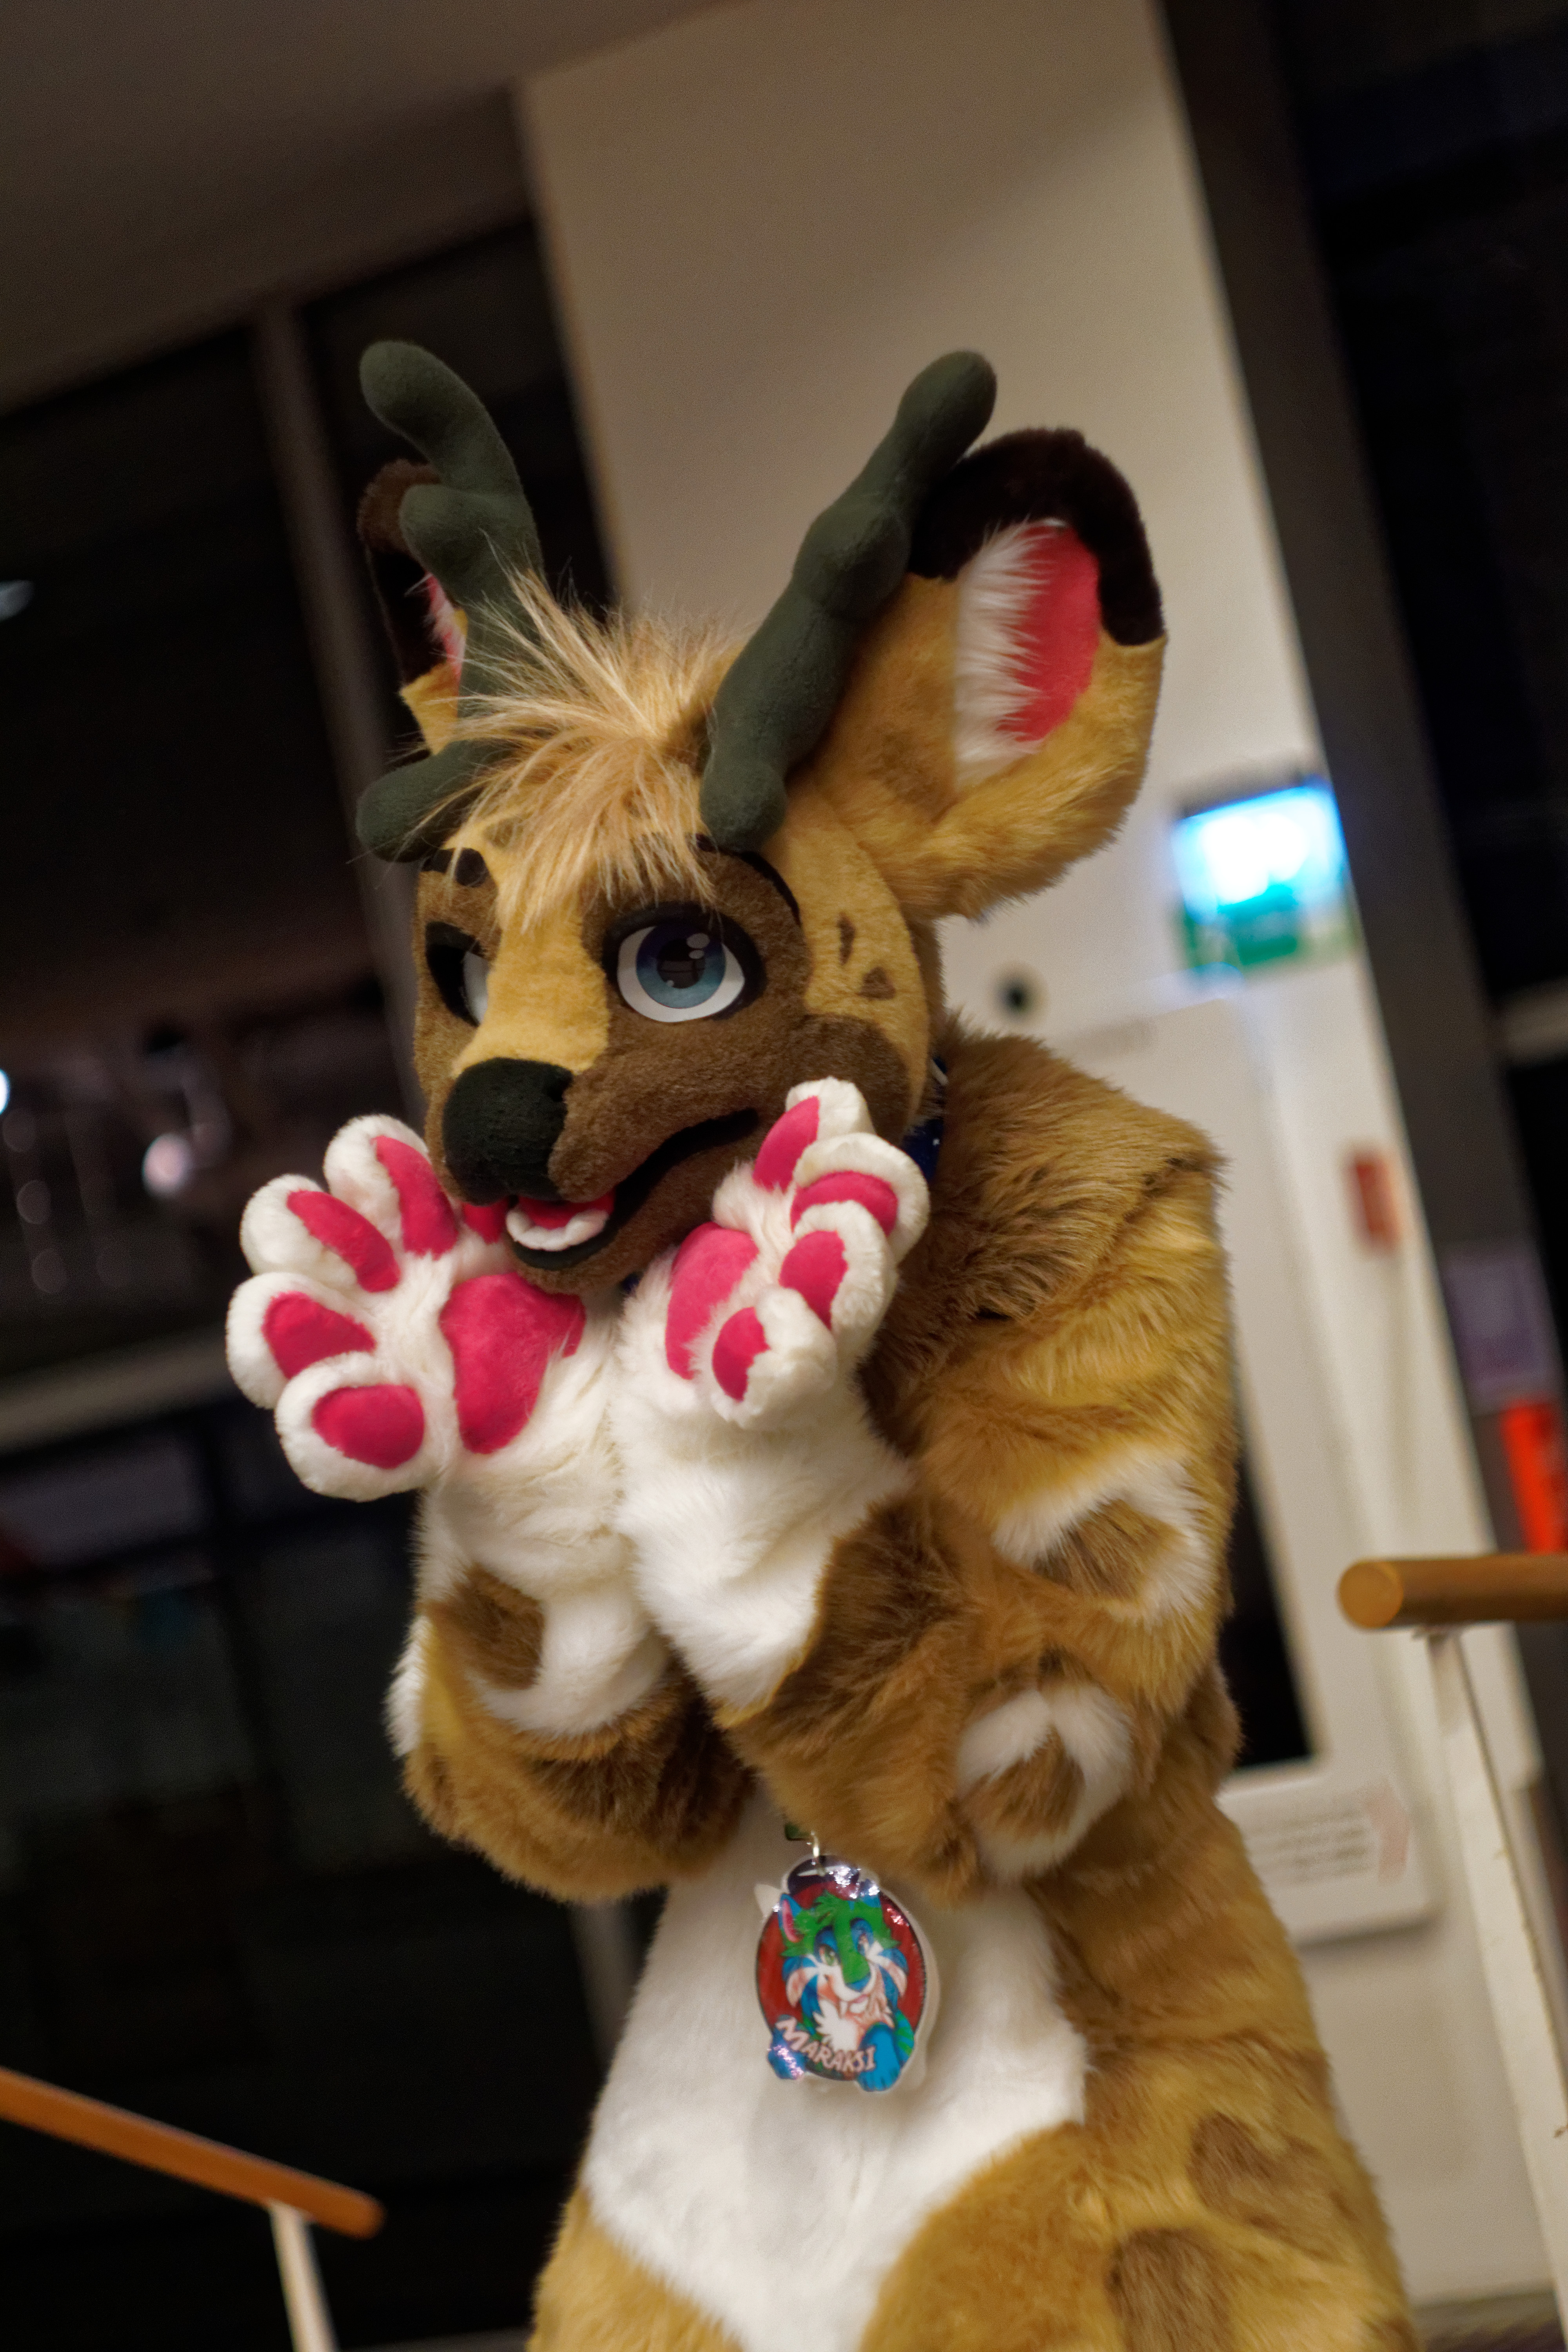 Taken at NFC, Credit to Rox